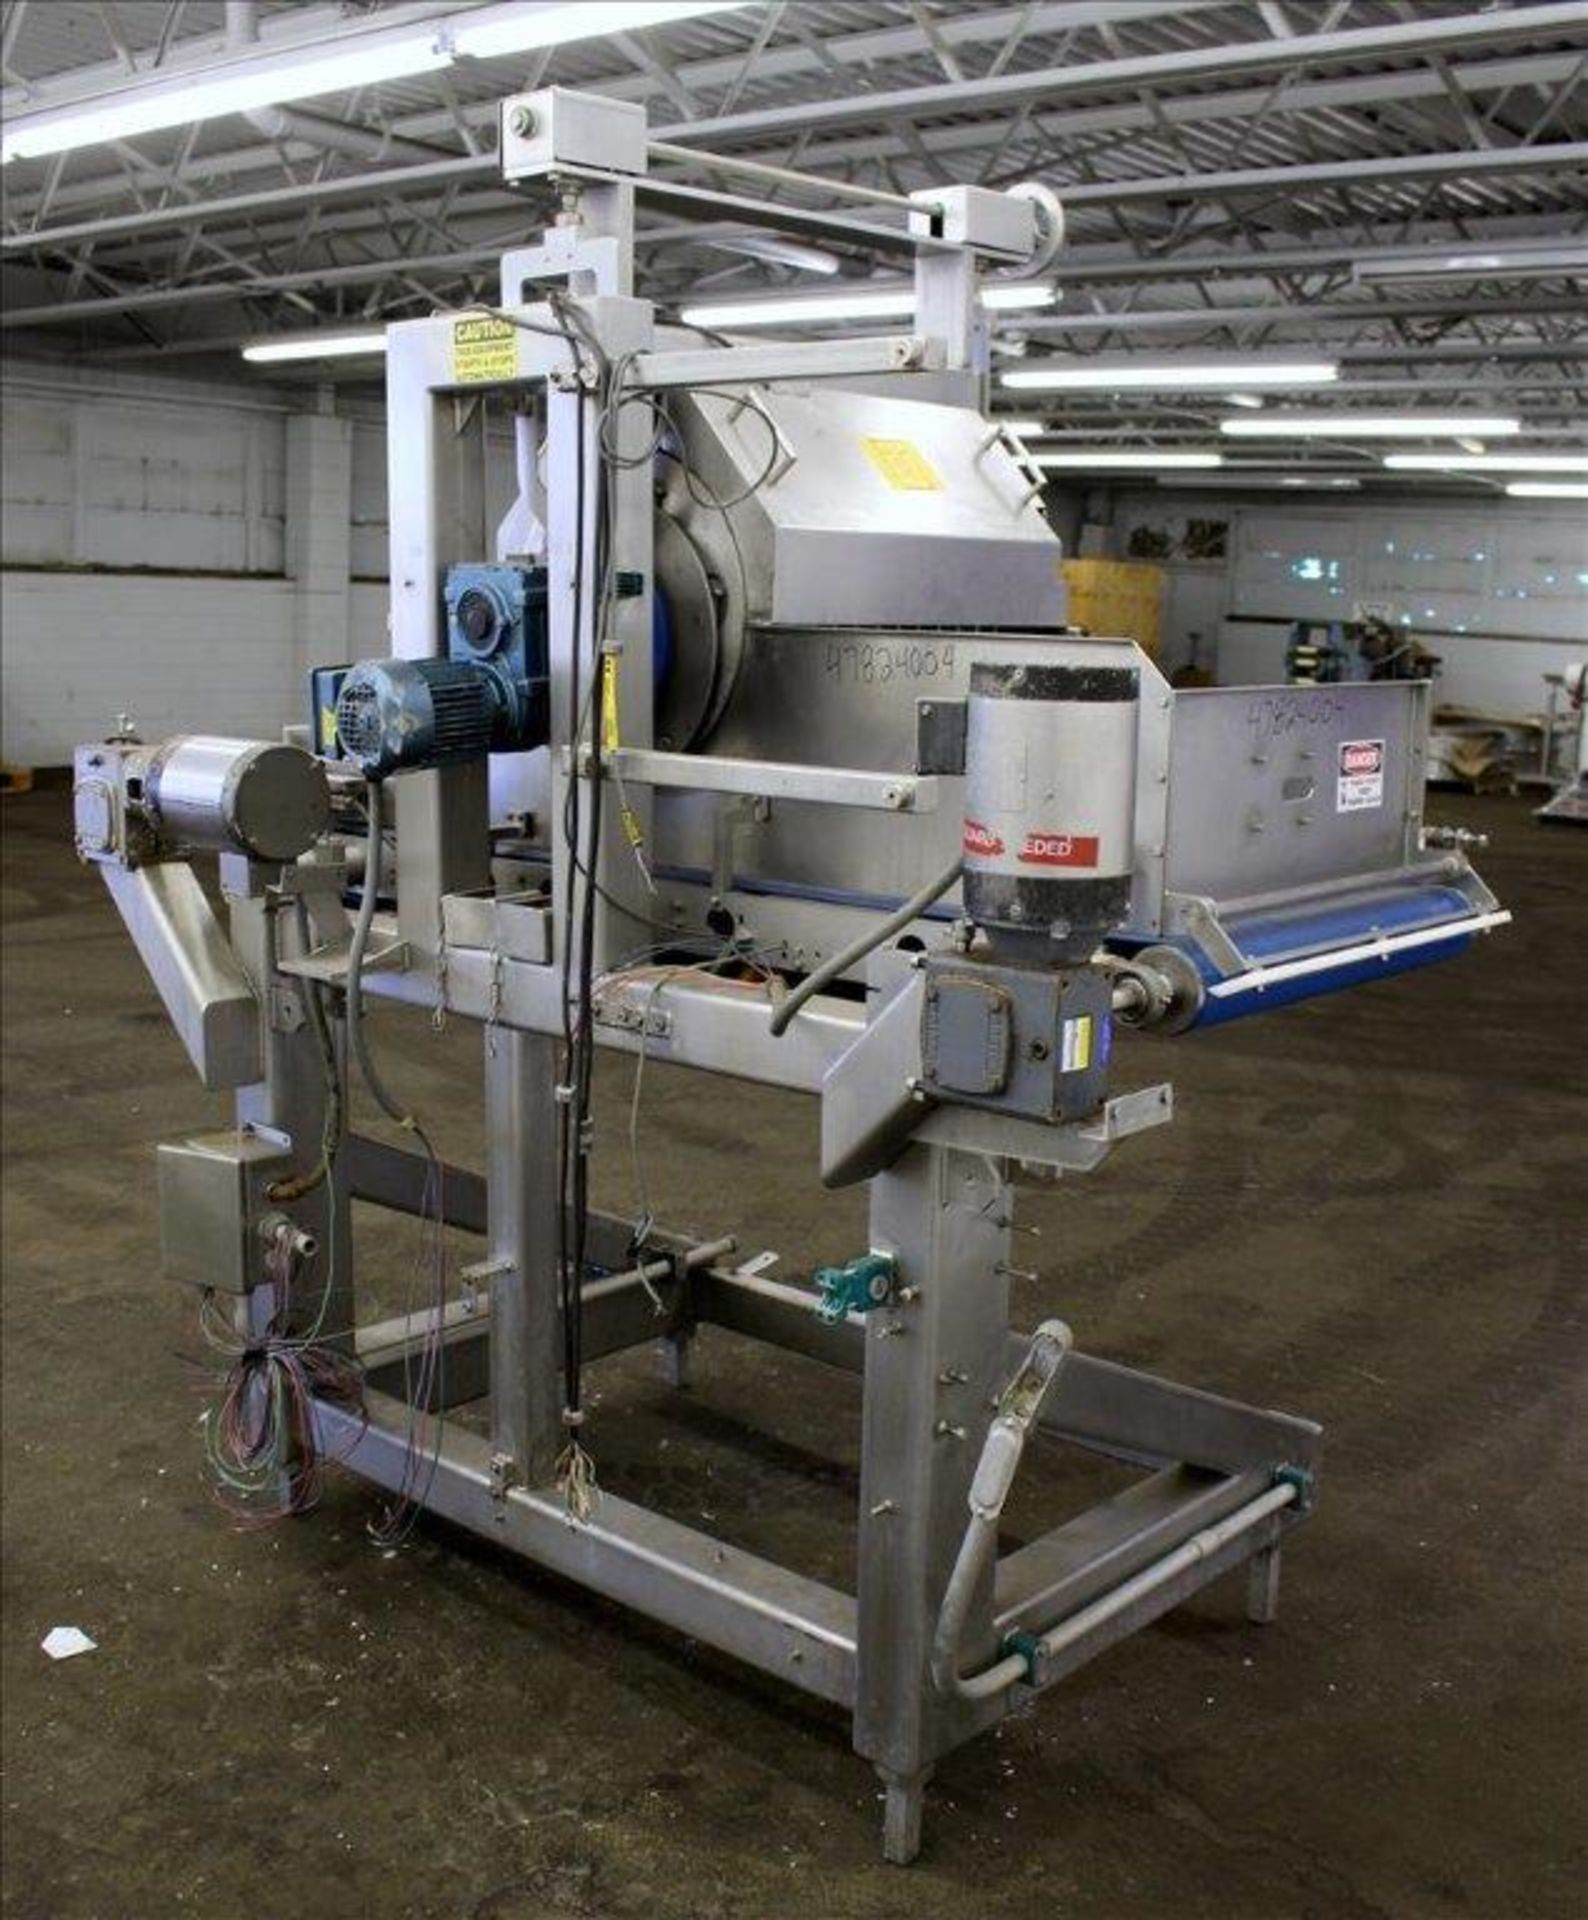 Waterfall Cheese/Applicator for Pizza, 304 Stainless Steel. Has 28" wide x 60" long belt conveyor - Image 14 of 46